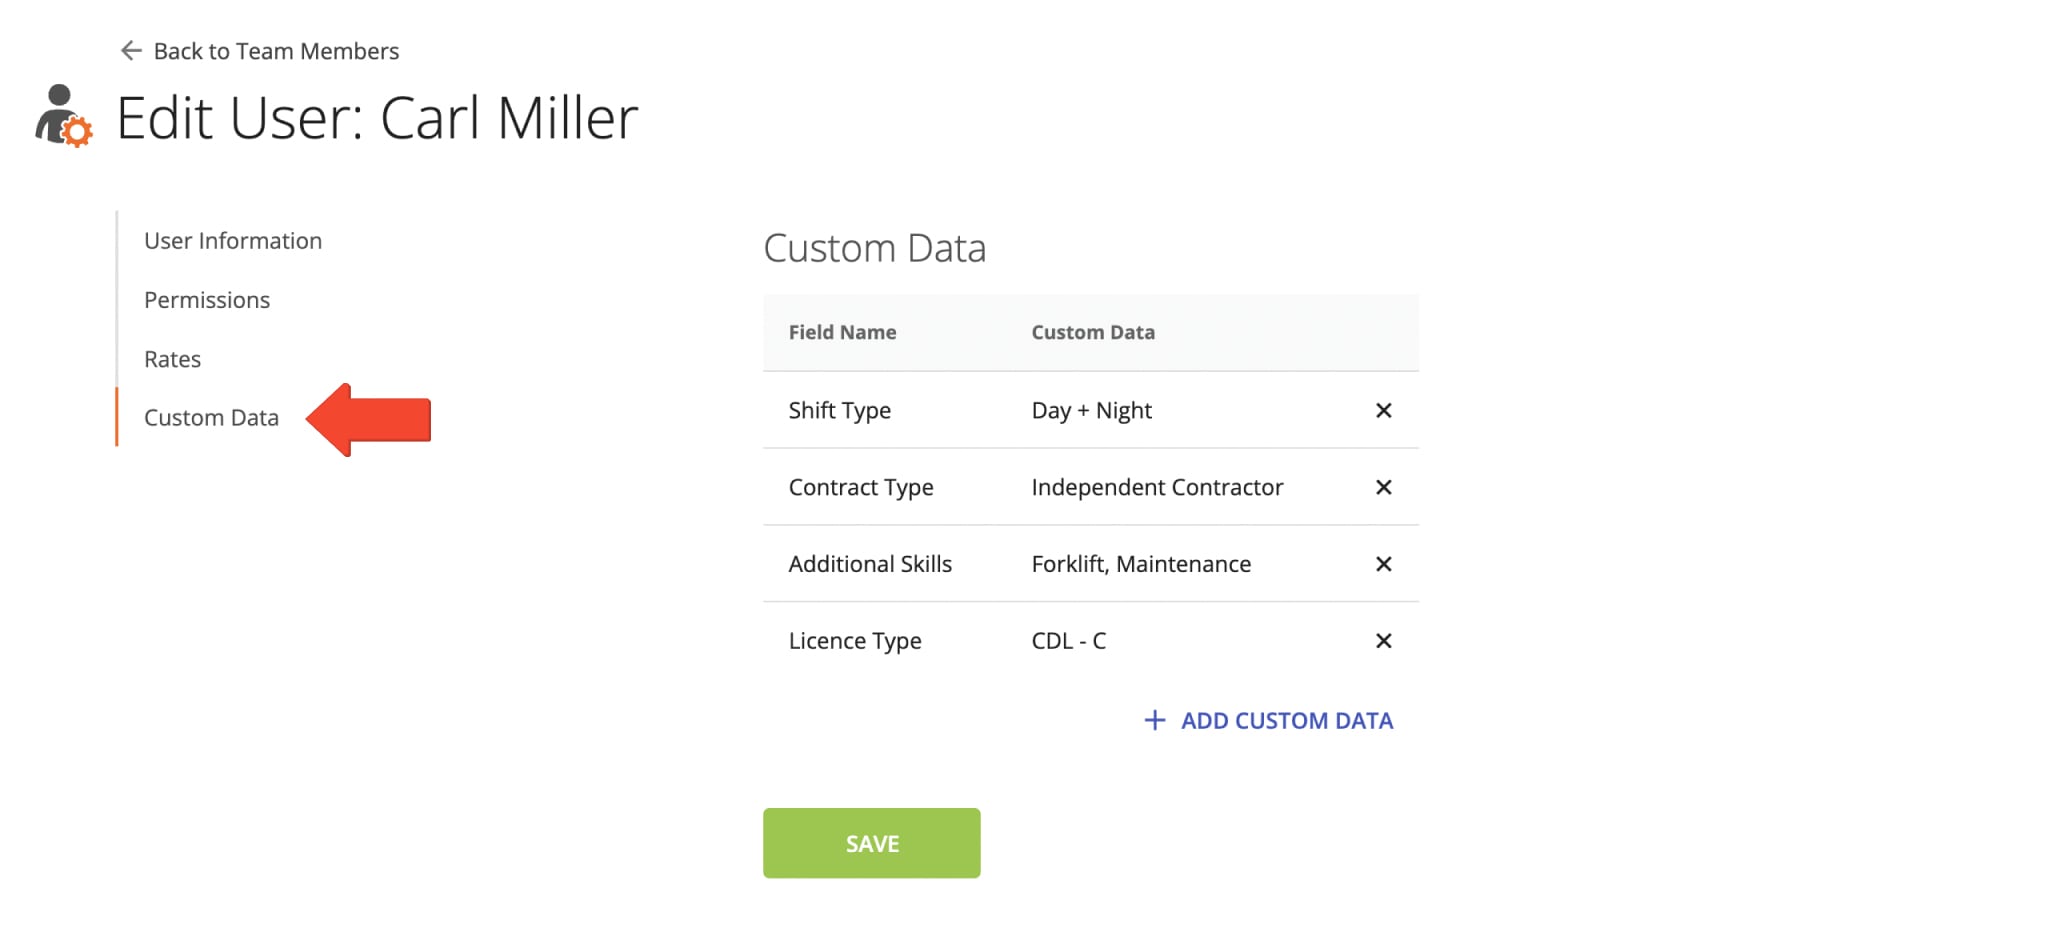 Add Custom Data to the existing user to attach additional driver, route planner, manager, or other user details.